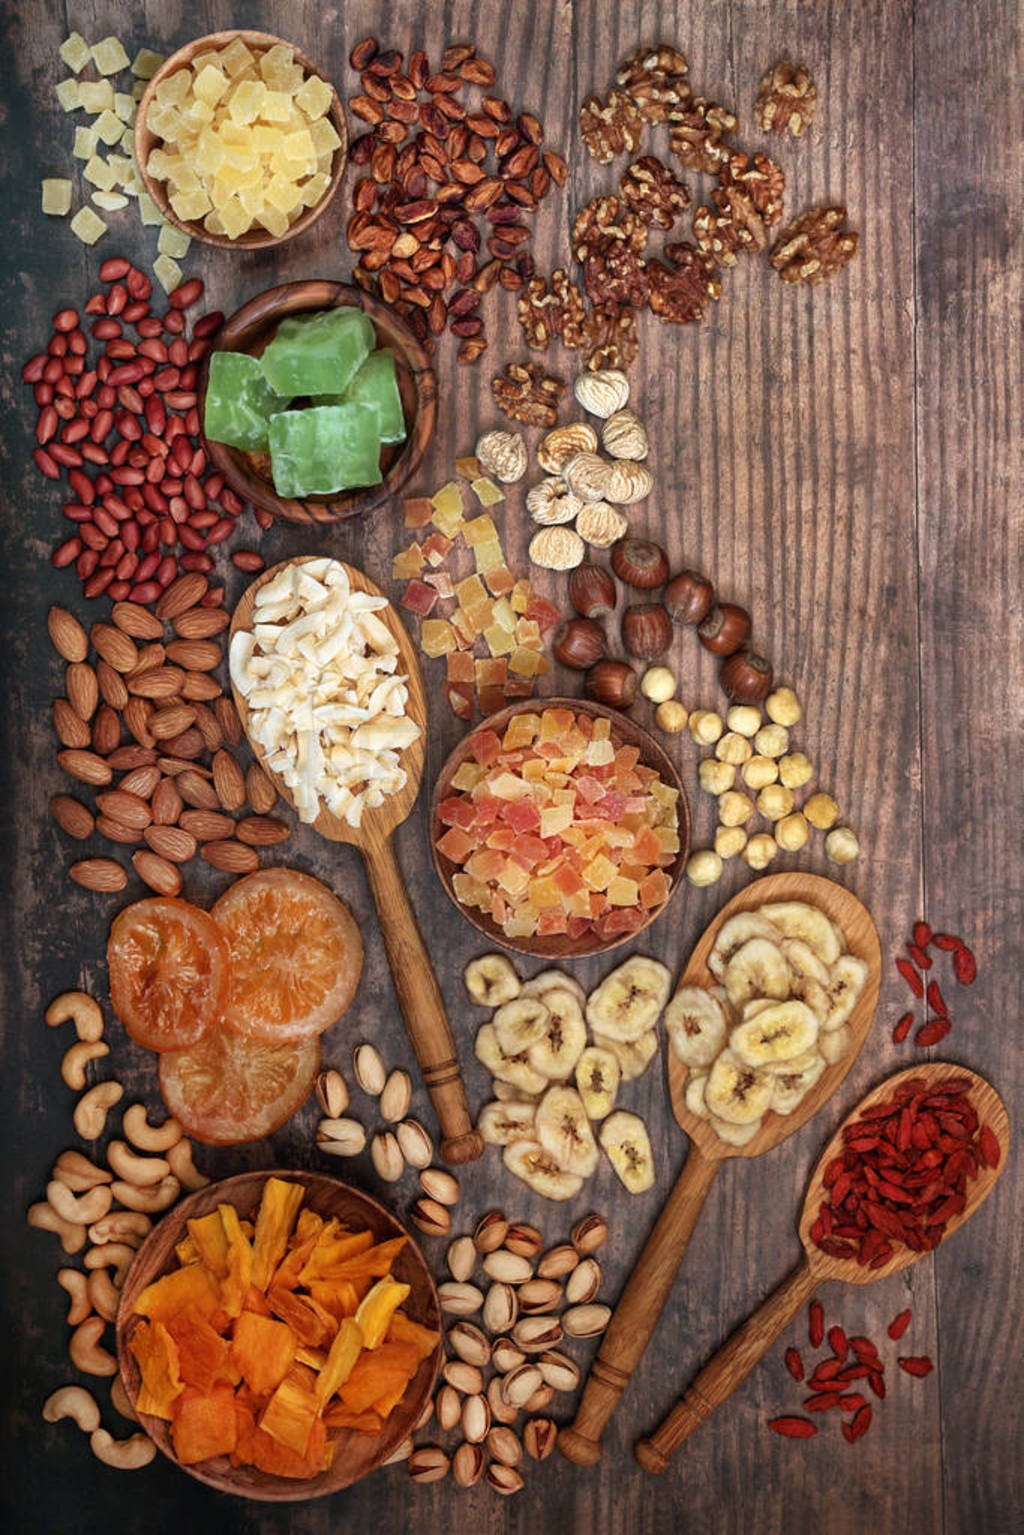 Dried Fruit and Nut Assortment on Rustic Wood